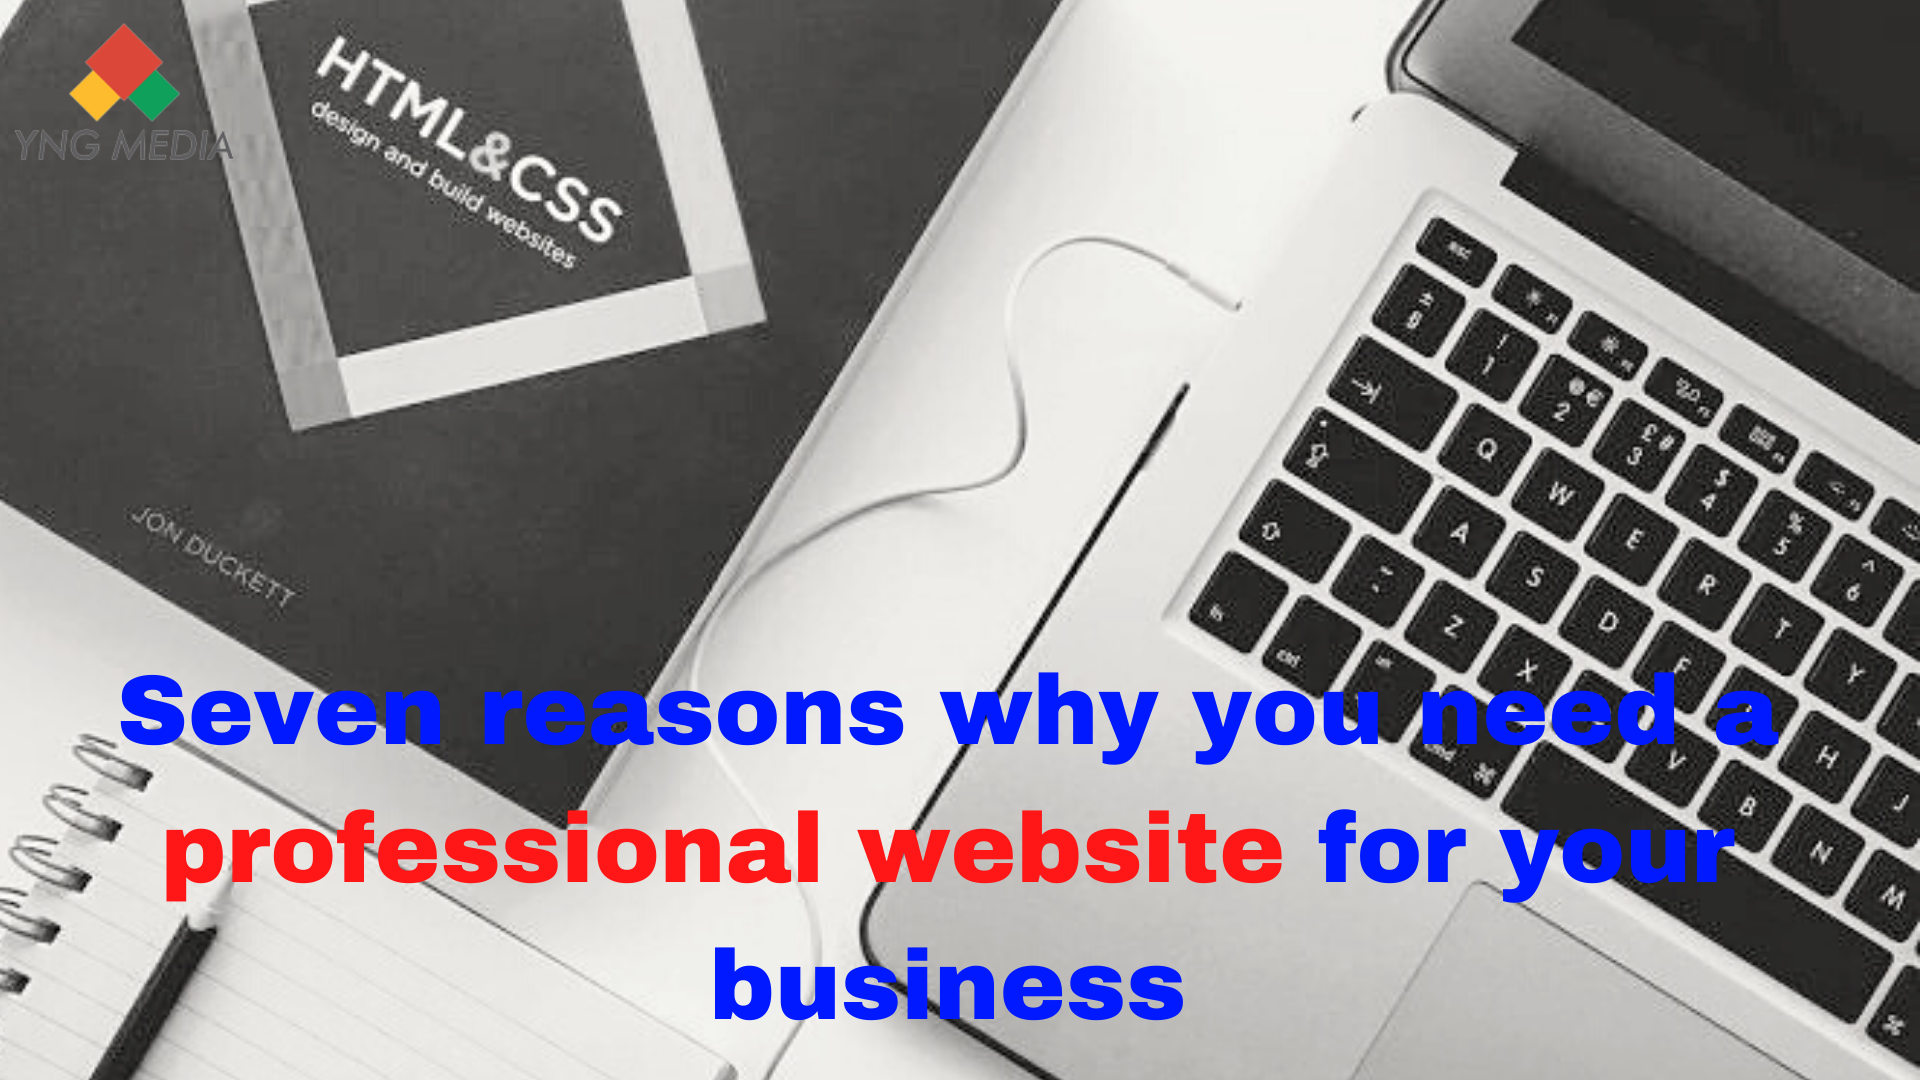 Seven reasons why you need a professional website for your business